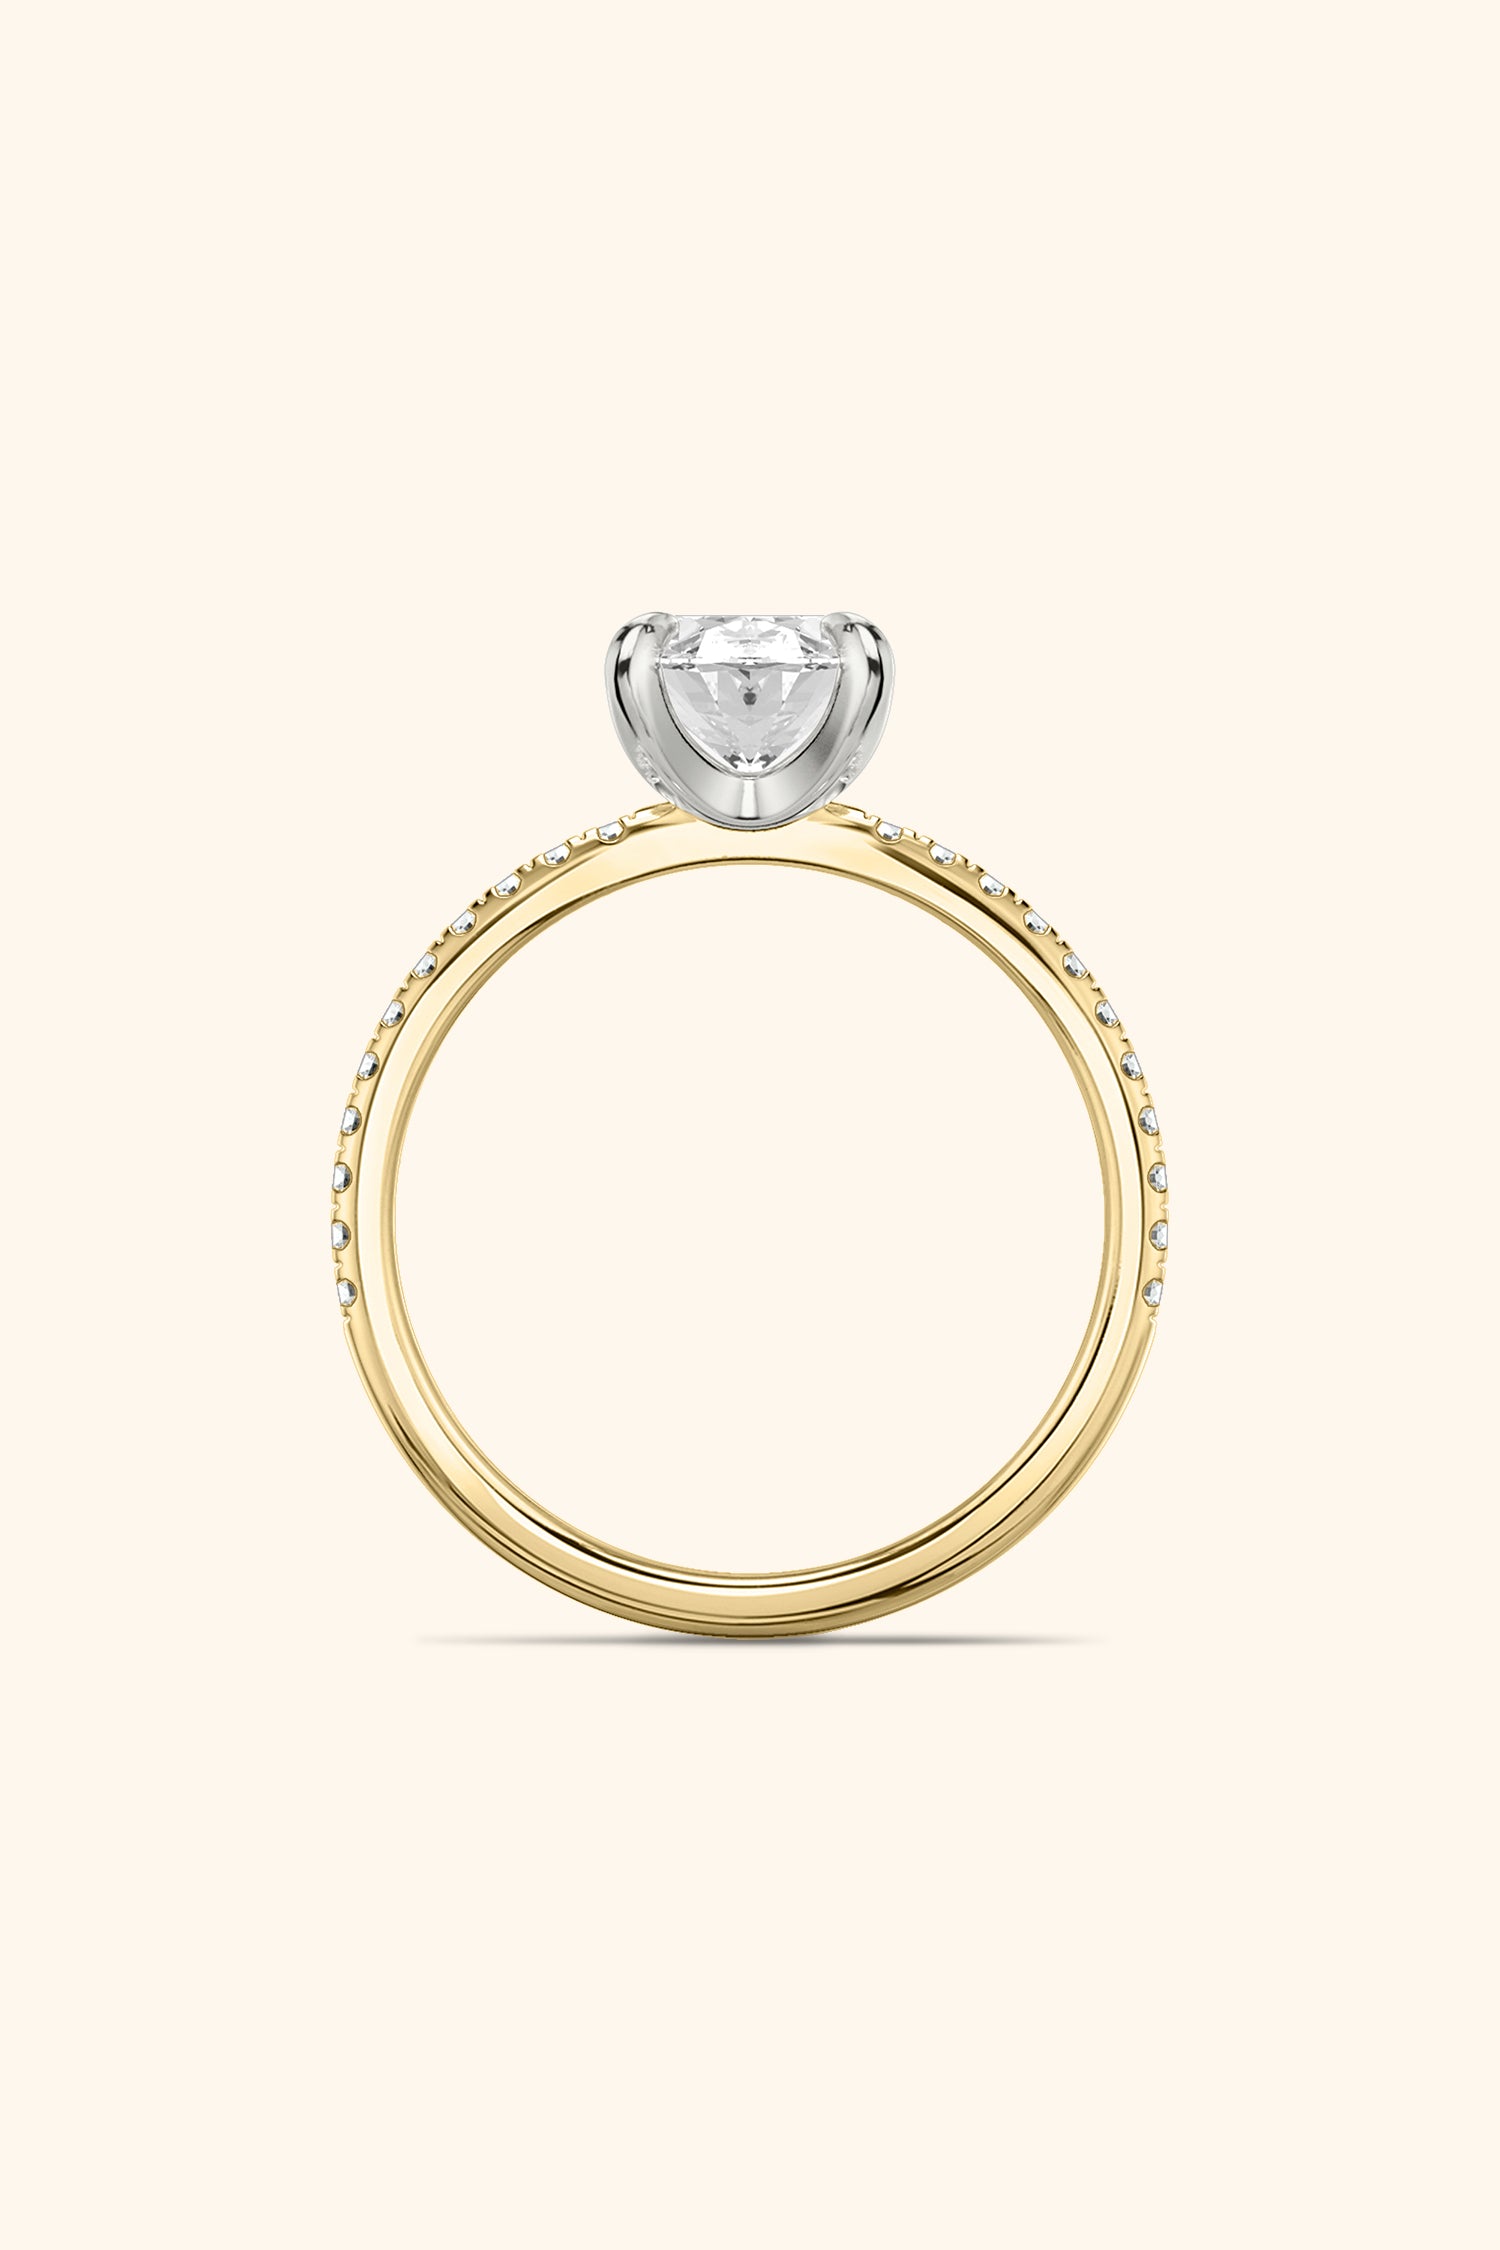 Dual Tone Glance Pavé Ring with 1 Carat Oval Solitaire